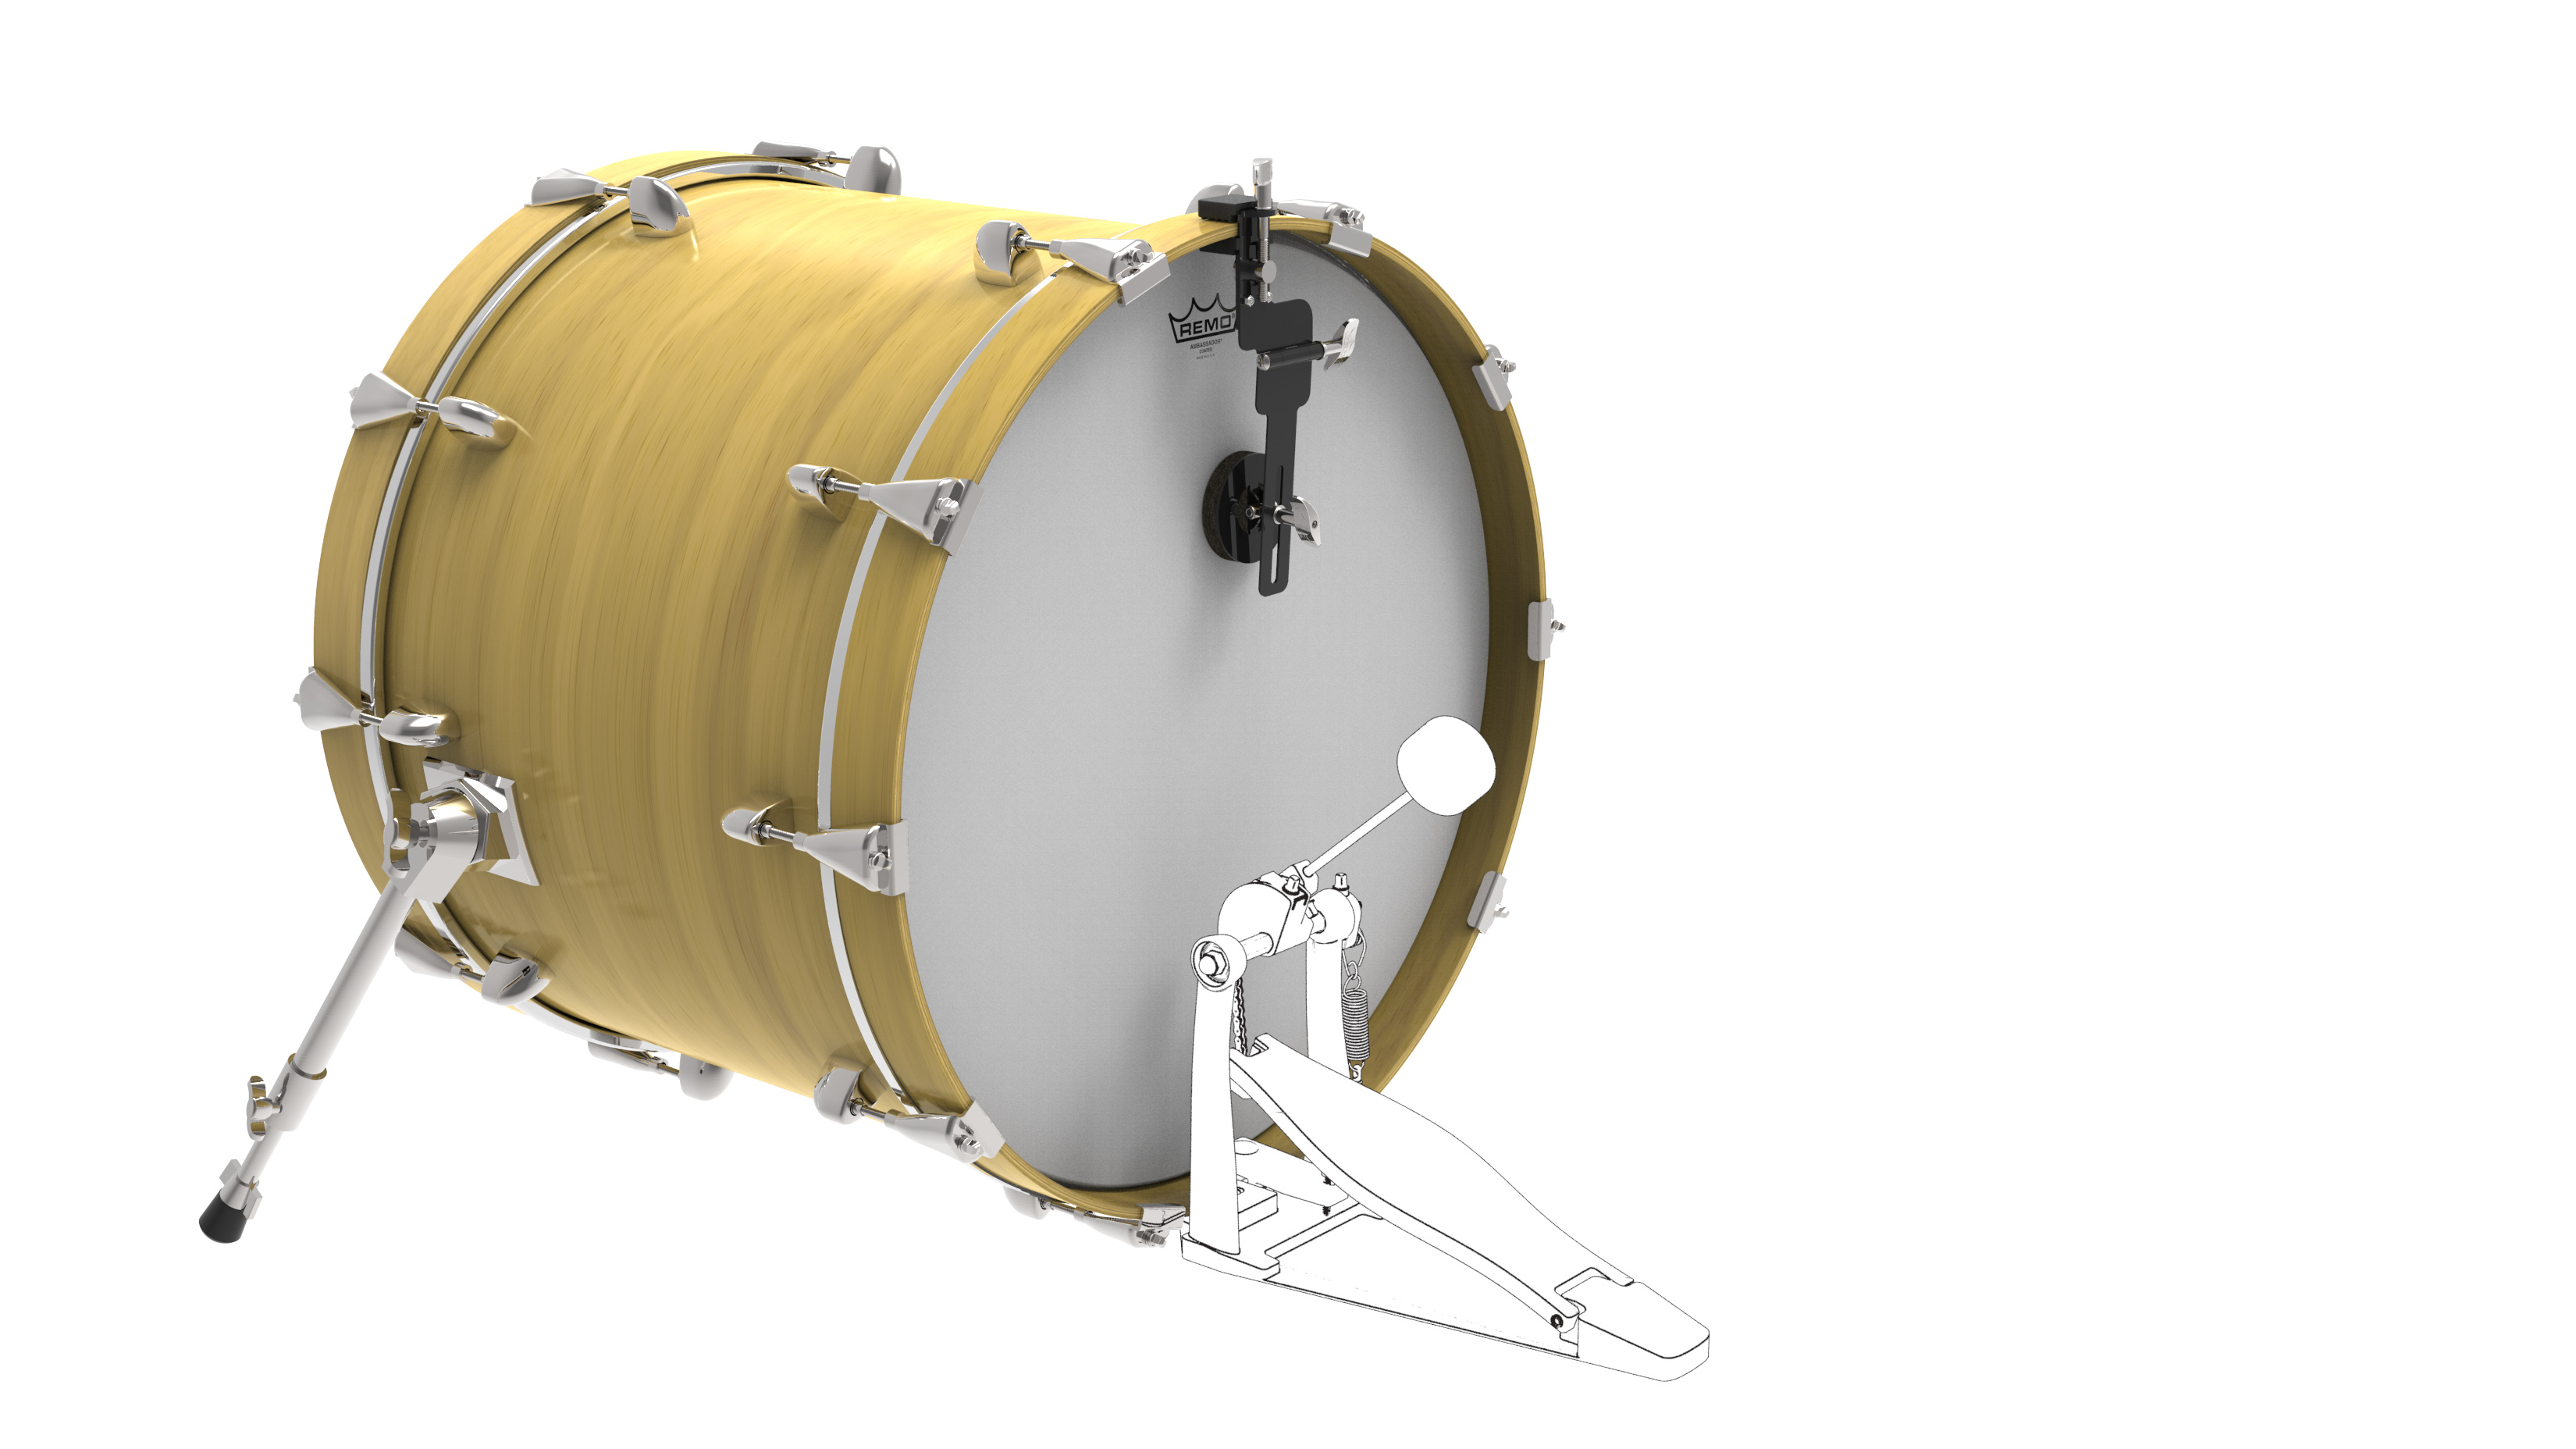 Bass Drum: Remo HK-6500-00 adjustable dampener, Designed by Remo and Dave Weckl, Adjusting the tone of the drum. 3300x1860 HD Wallpaper.